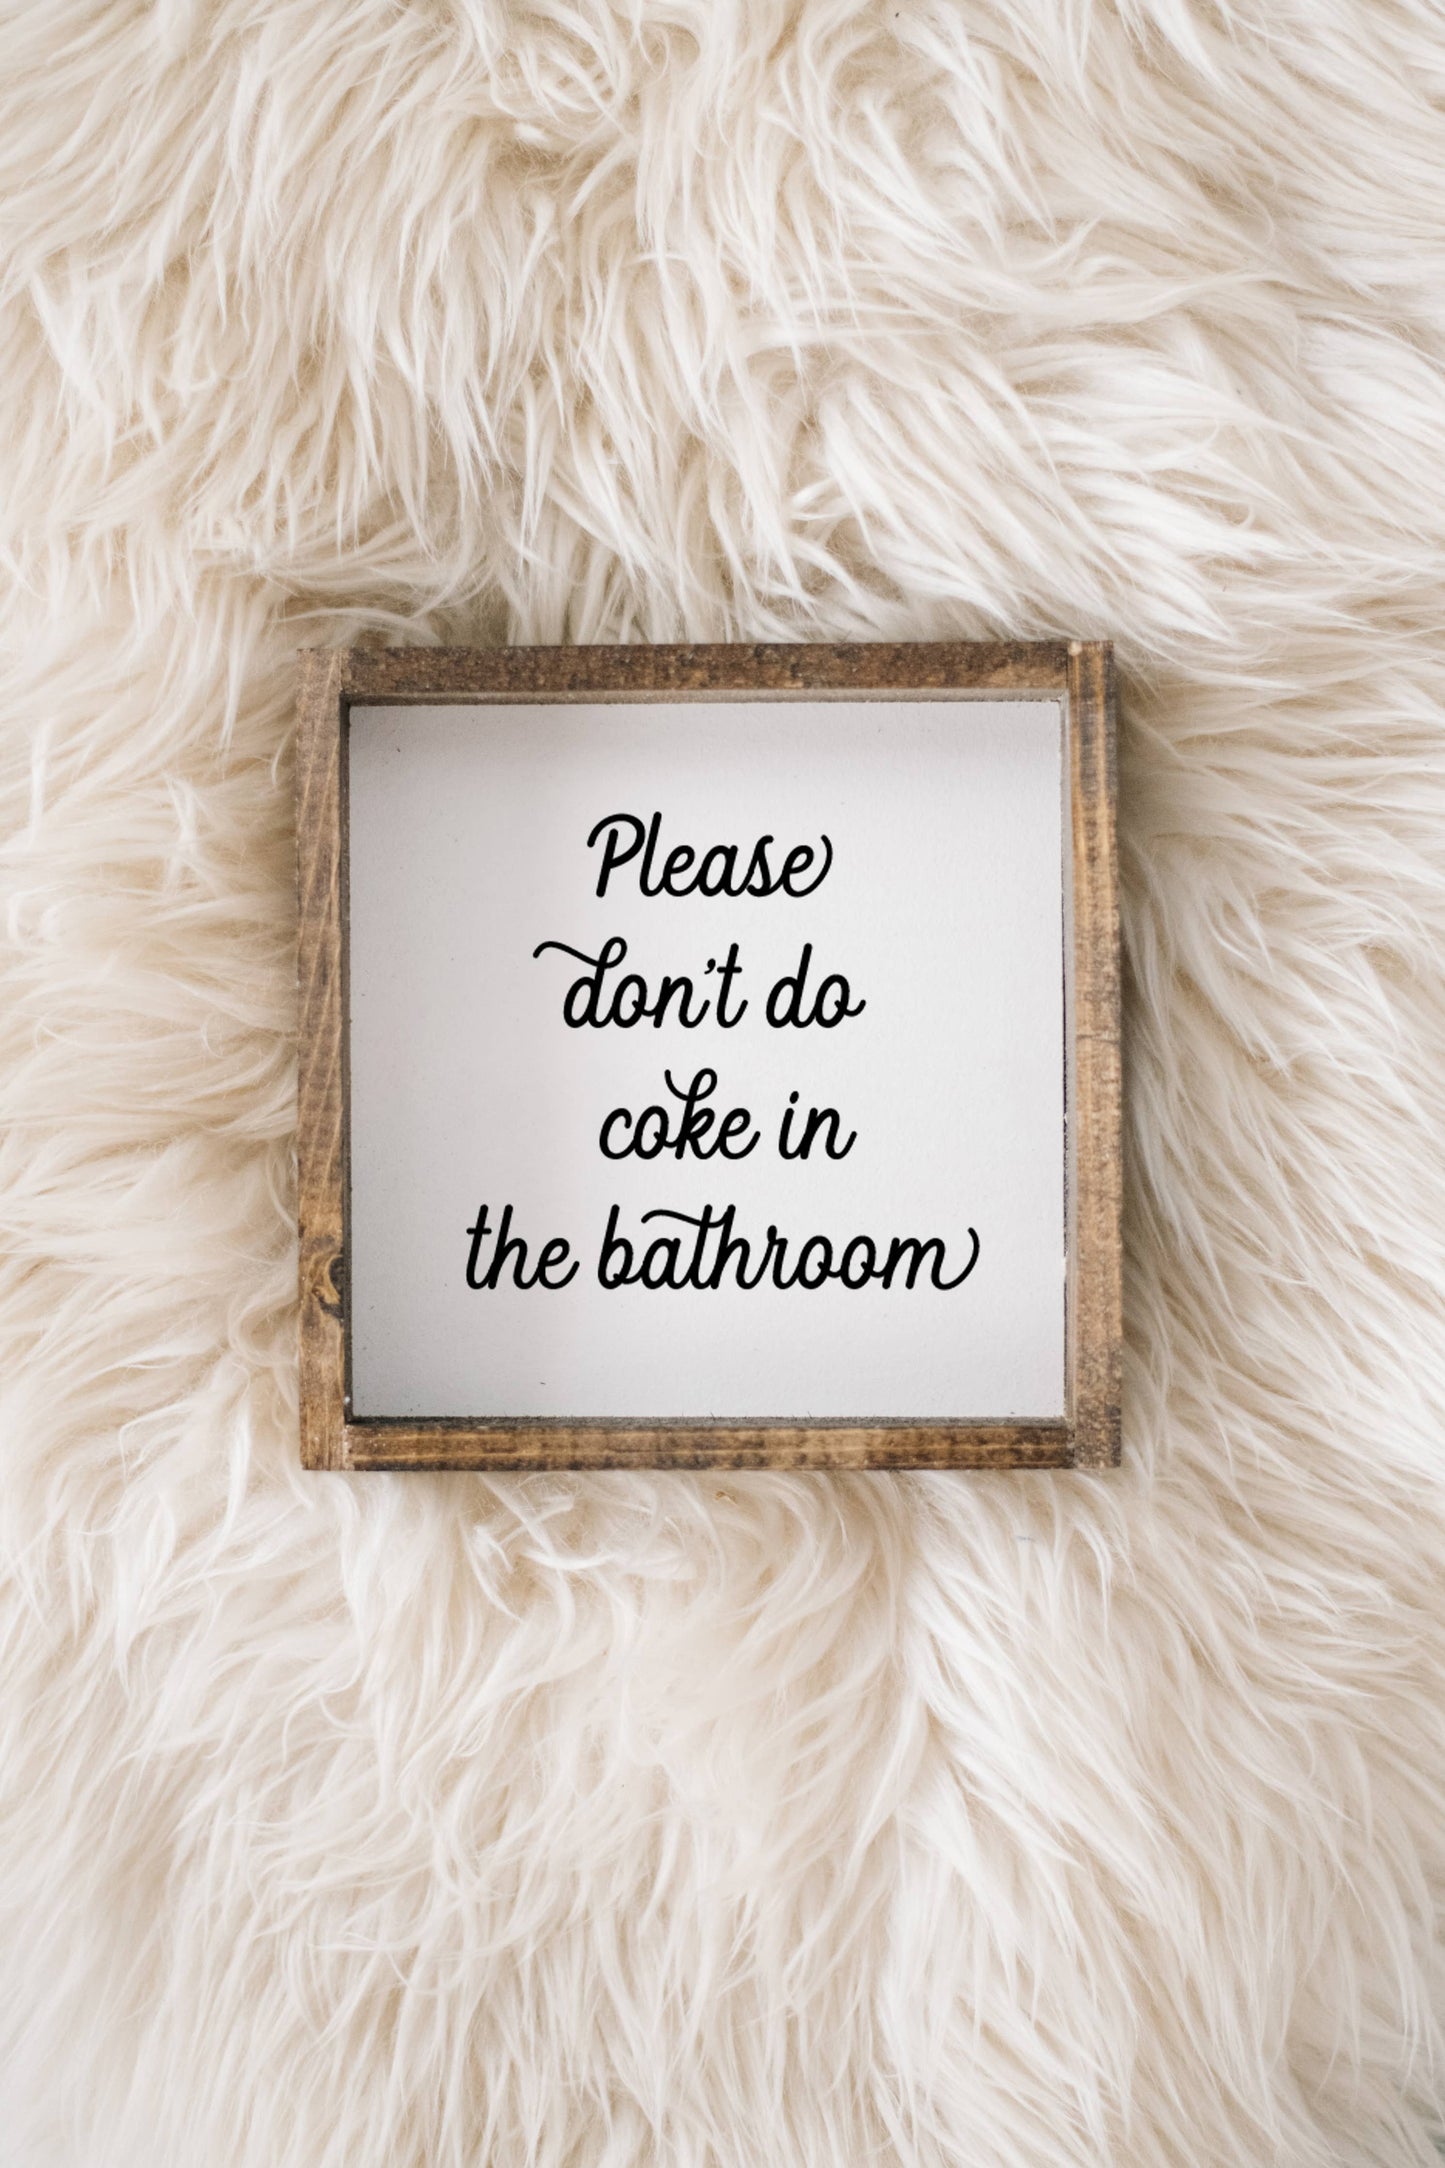 Please Don't Do Coke in the Bathroom Wood Sign - White